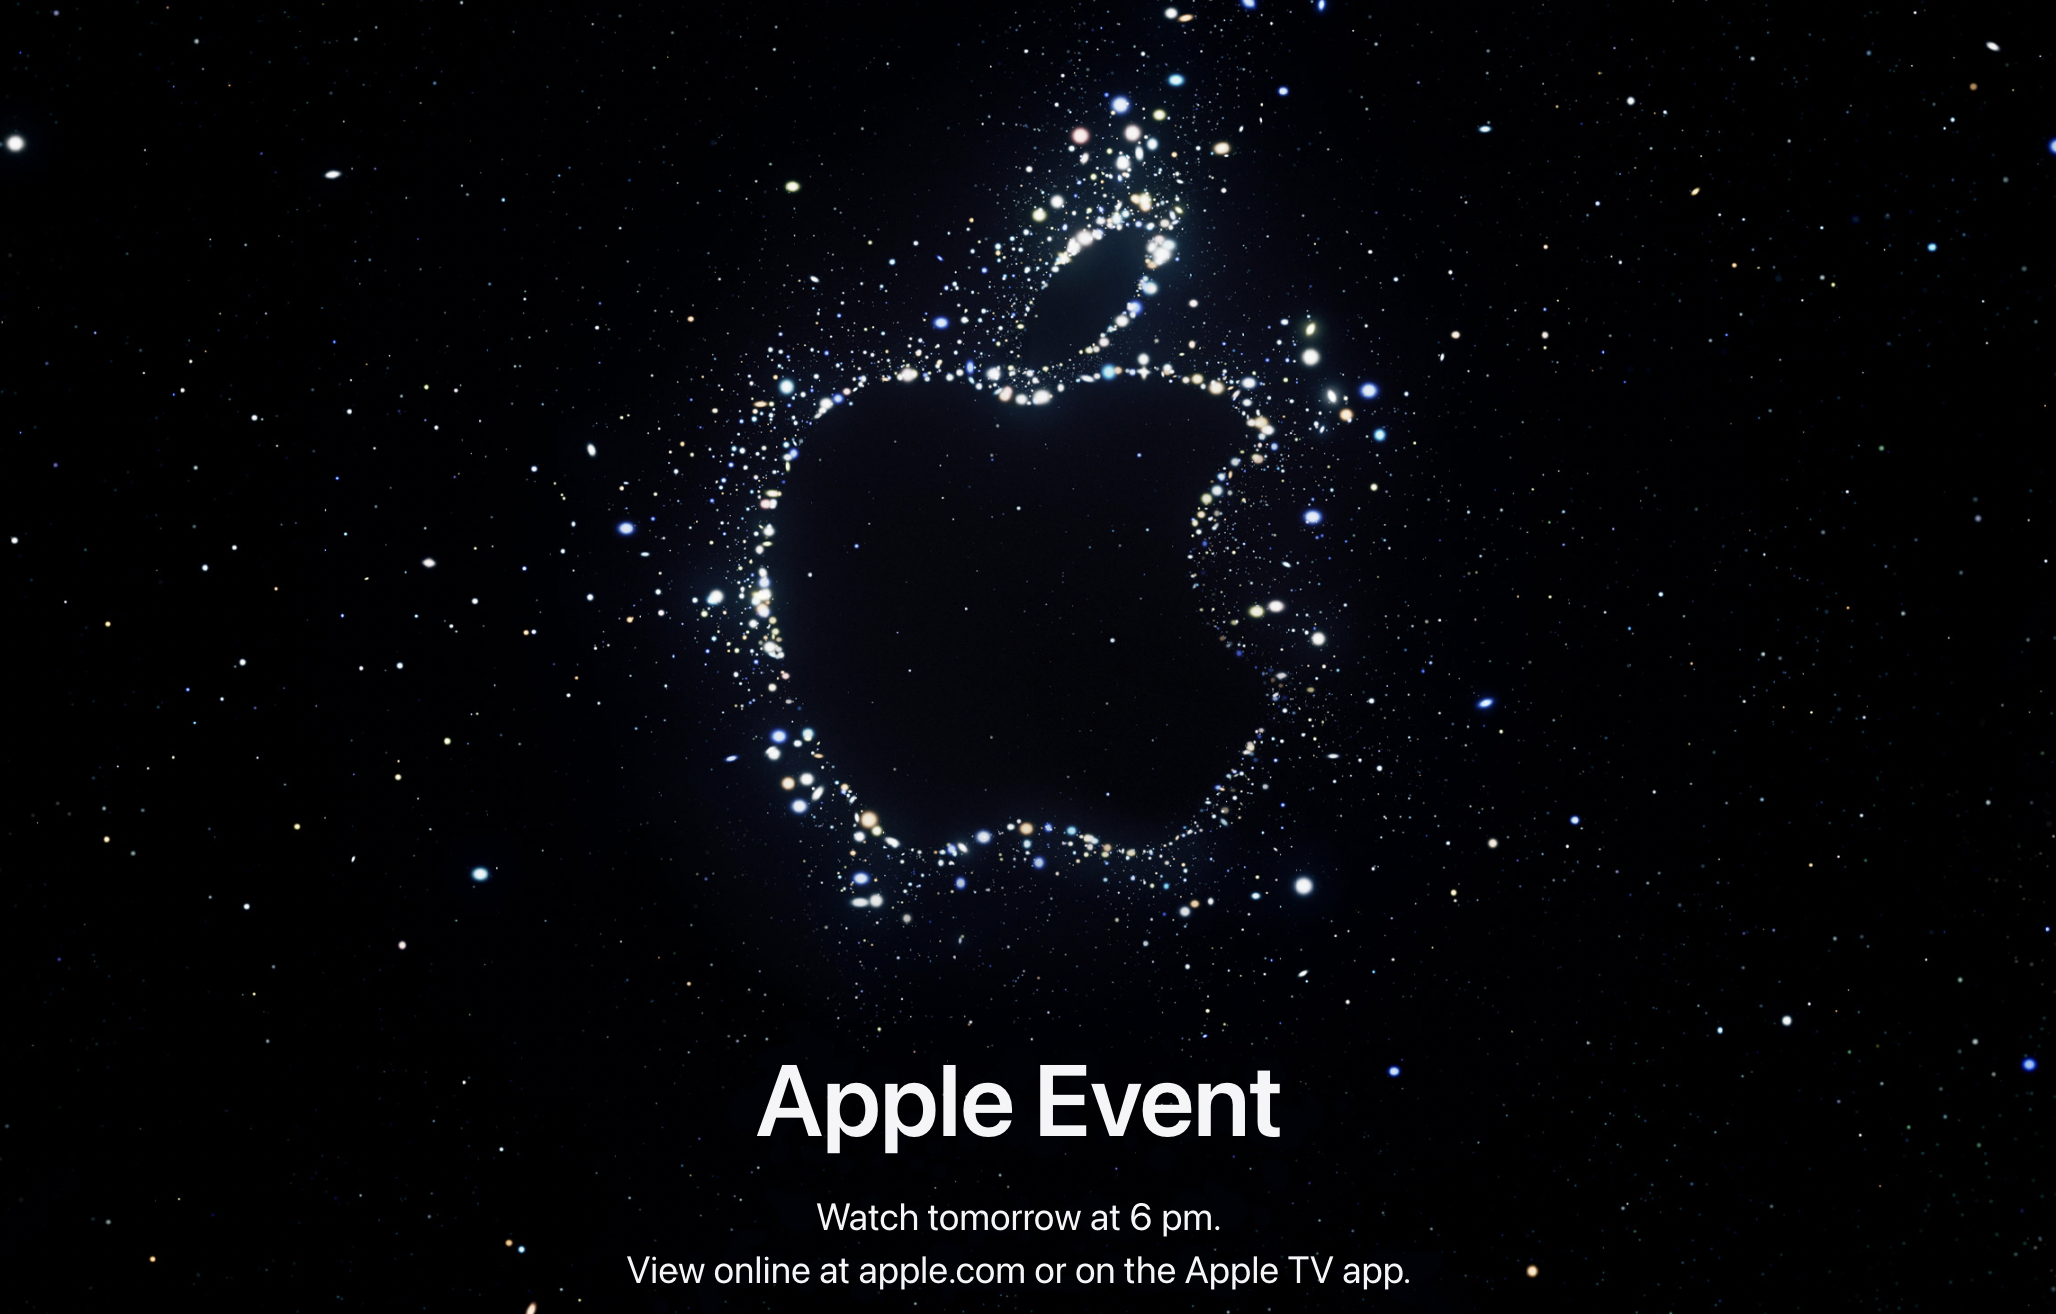 Invitation to an Apple event